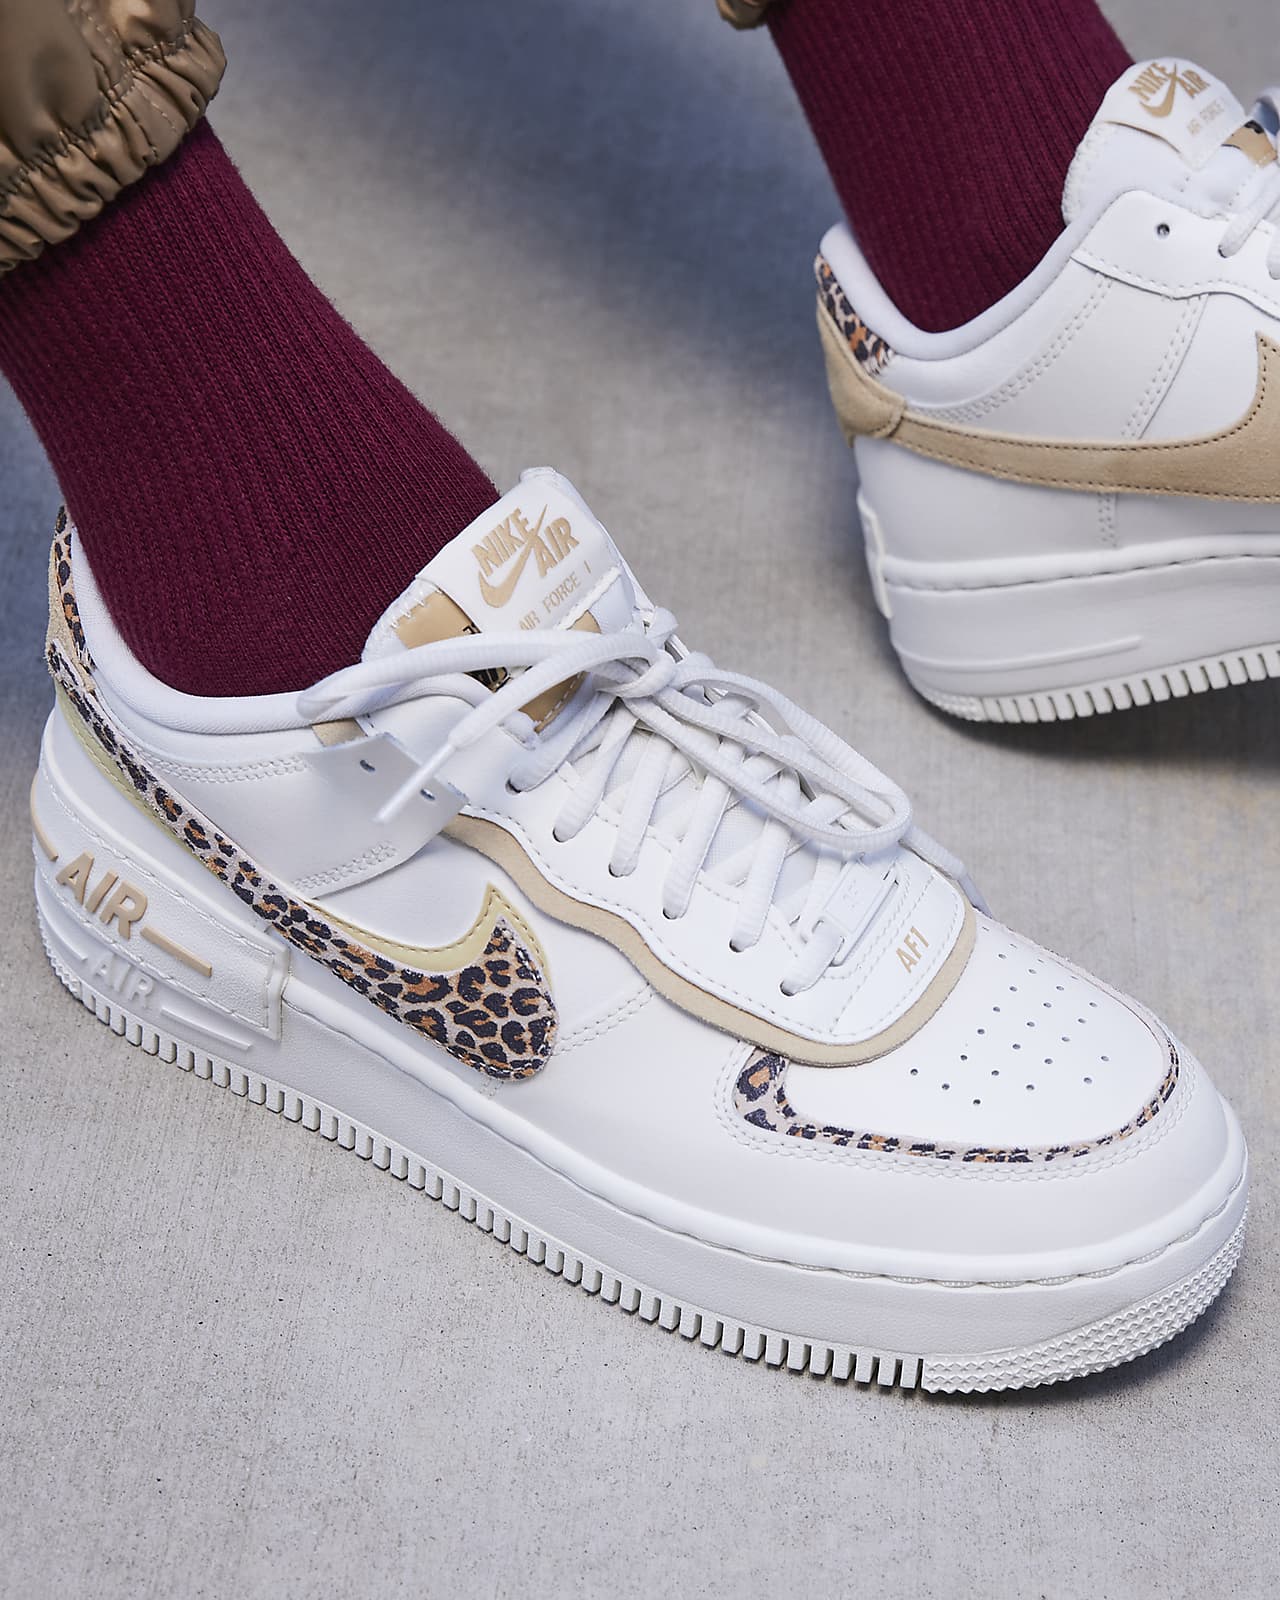 when did nike air force 1 shadow come out